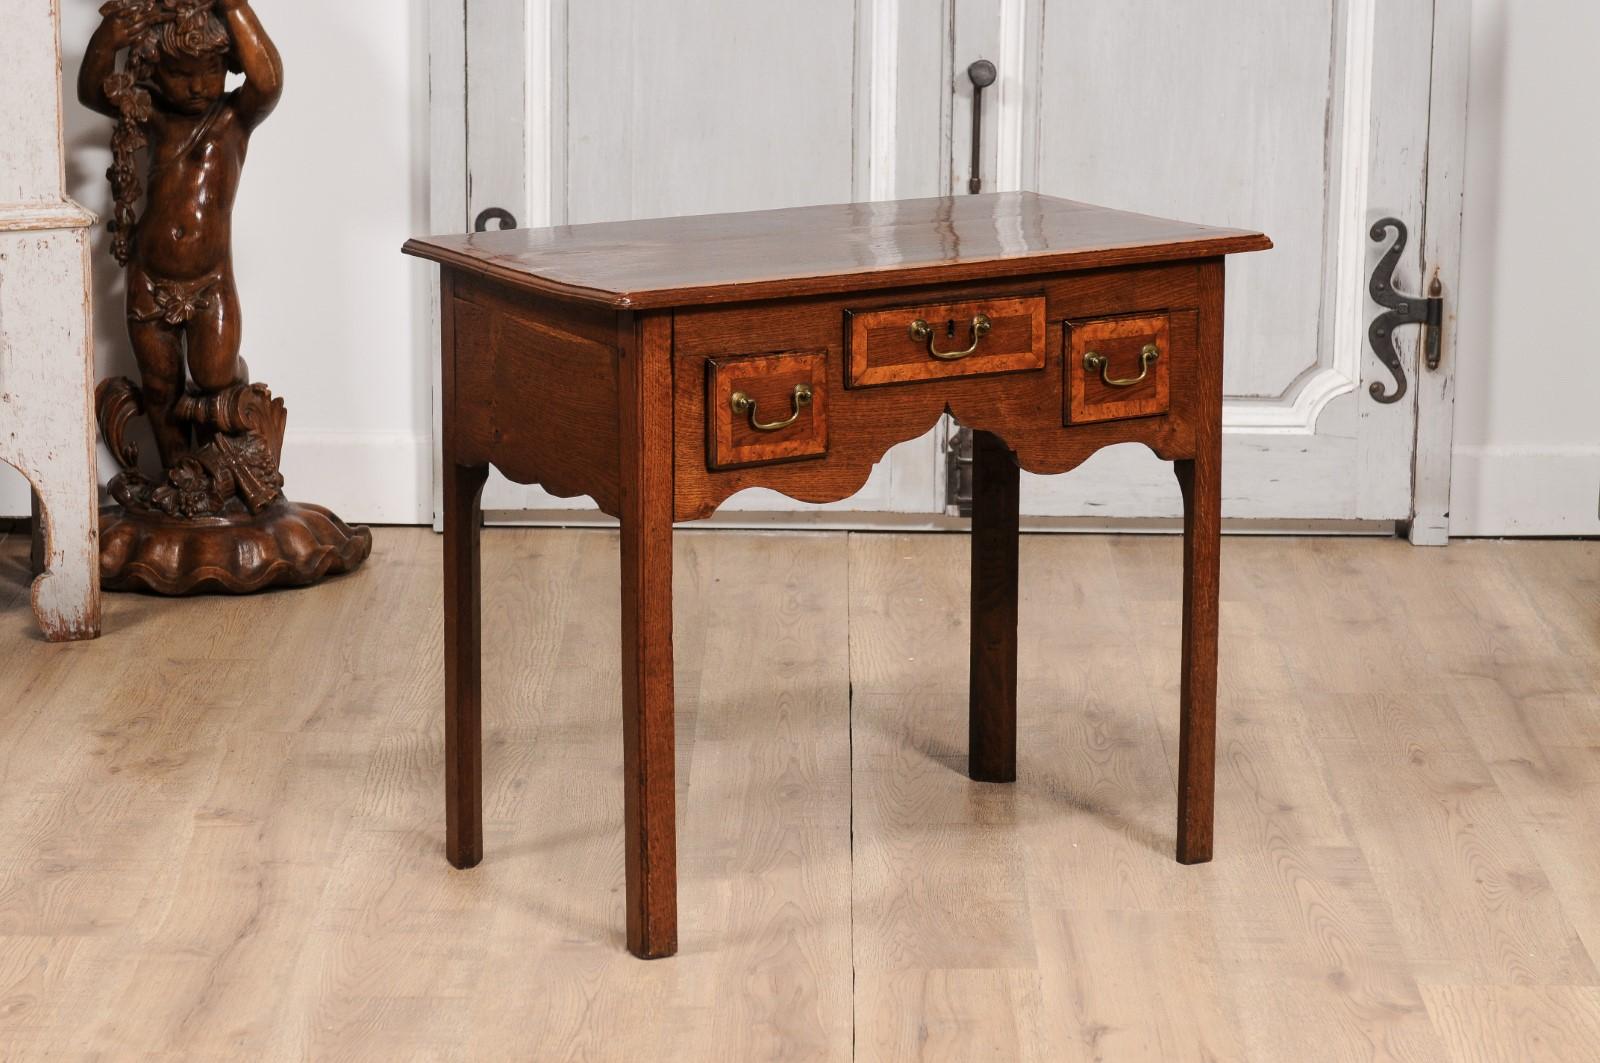 English Georgian Period 18th Century Oak Lowboy Side Table with Carved Apron In Good Condition For Sale In Atlanta, GA